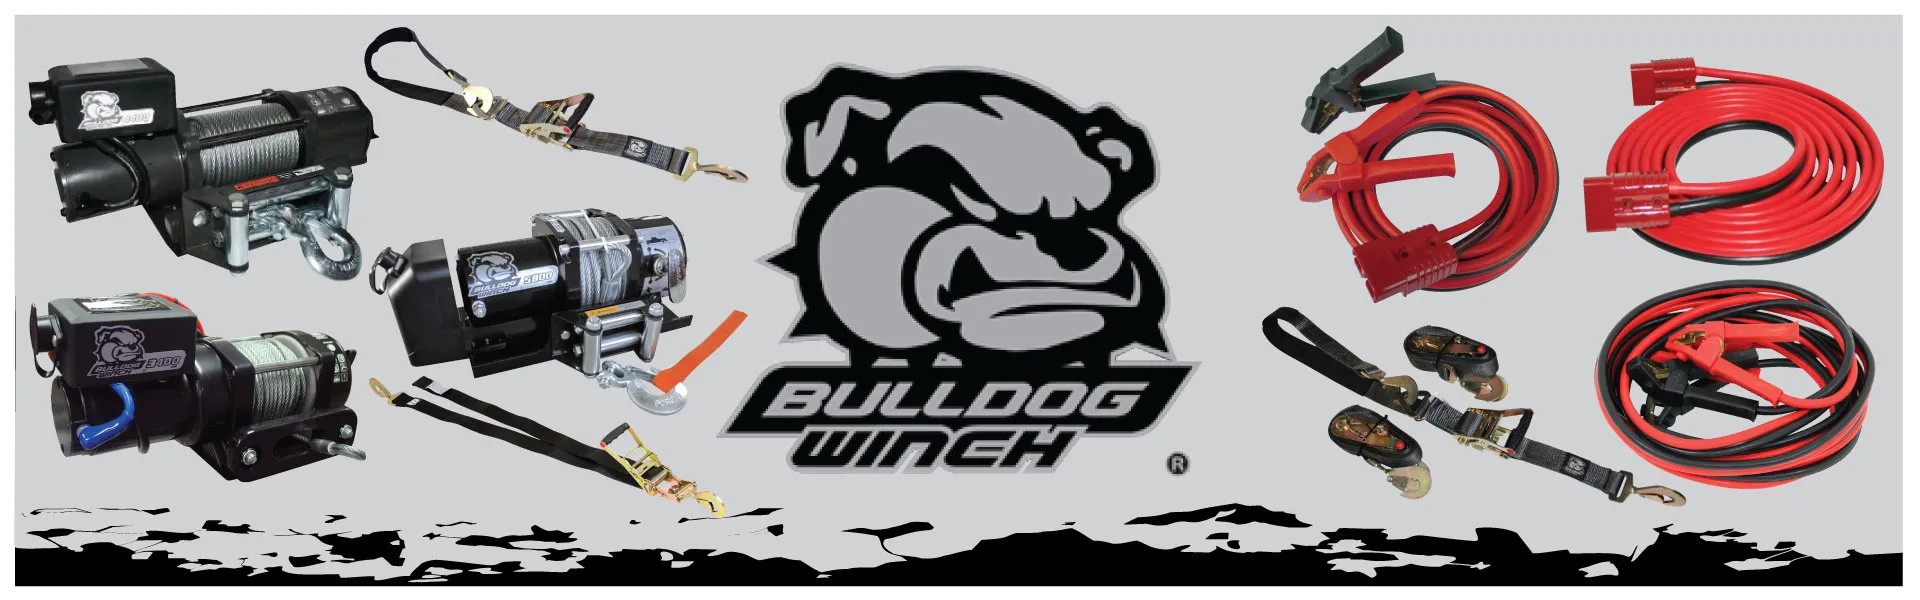 Bulldog Winches and Accessories available for your trailer at Day Motor Sports.